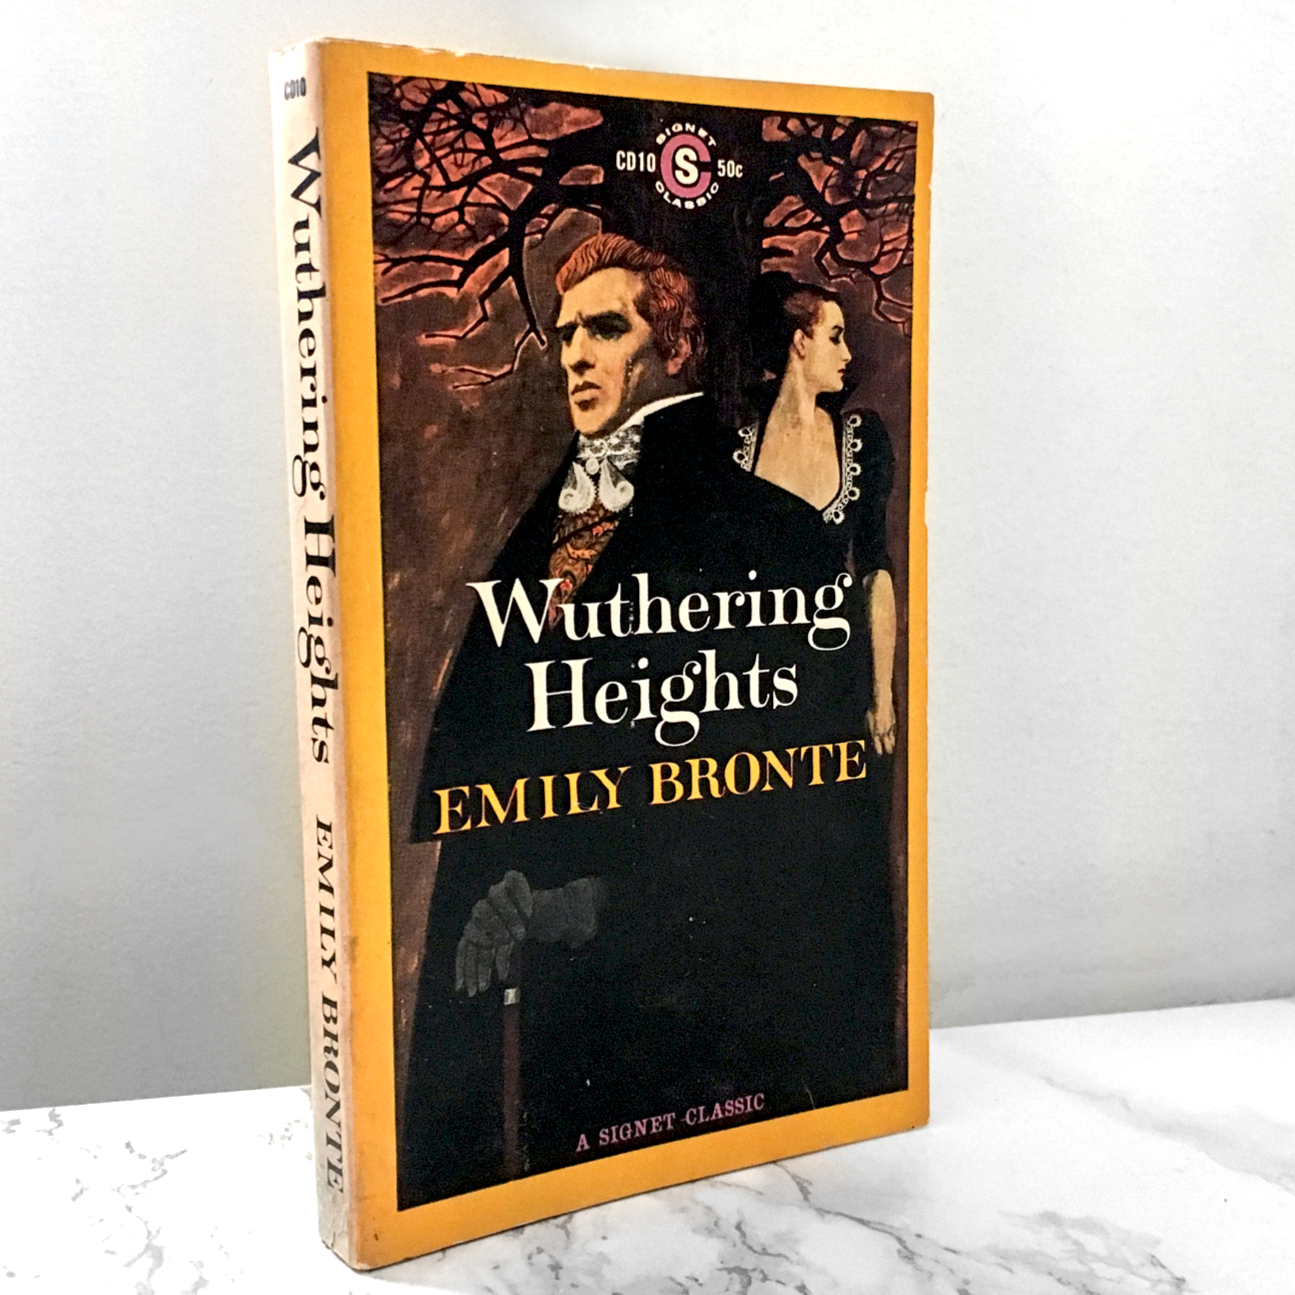 Wuthering Heights by Emily Bronte [1960 PAPERBACK]